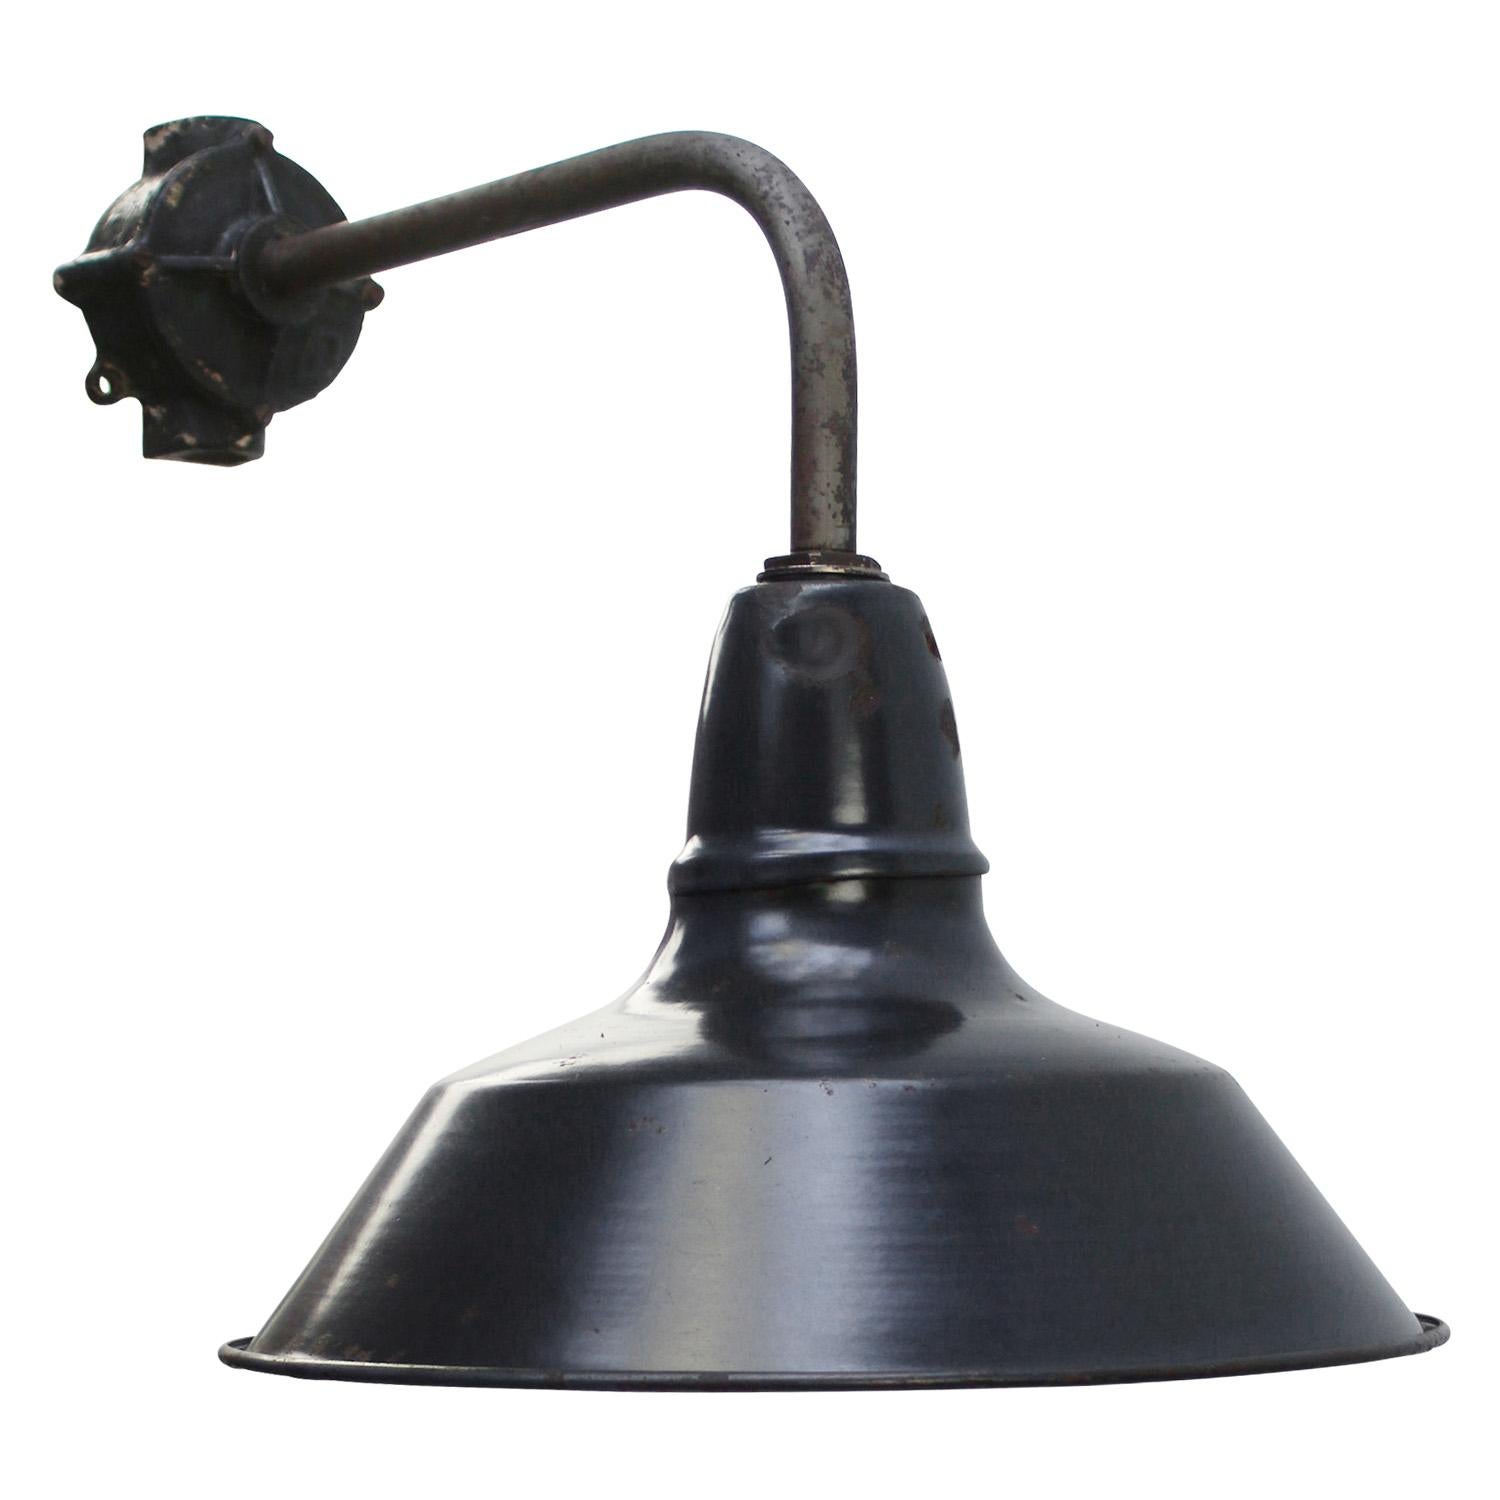 French factory wall light
black / dark blue enamel, white type, white interior

diameter cast iron wall piece: 9 cm, 2 holes to secure

Weight: 1.80 kg / 4 lb

Priced per individual item. All lamps have been made suitable by international standards